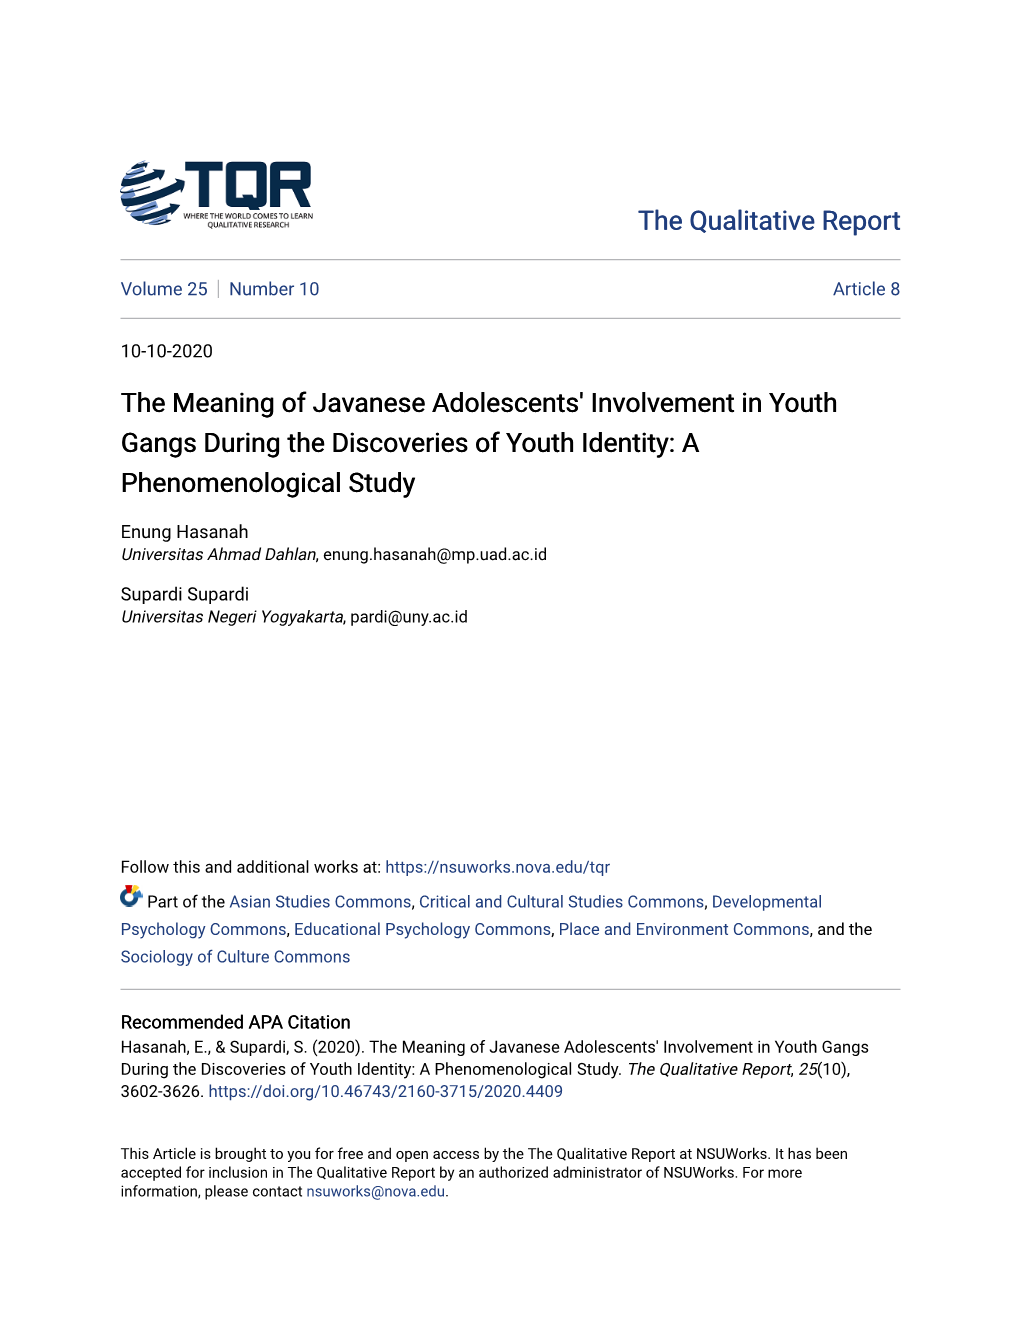 The Meaning of Javanese Adolescents' Involvement in Youth Gangs During the Discoveries of Youth Identity: a Phenomenological Study